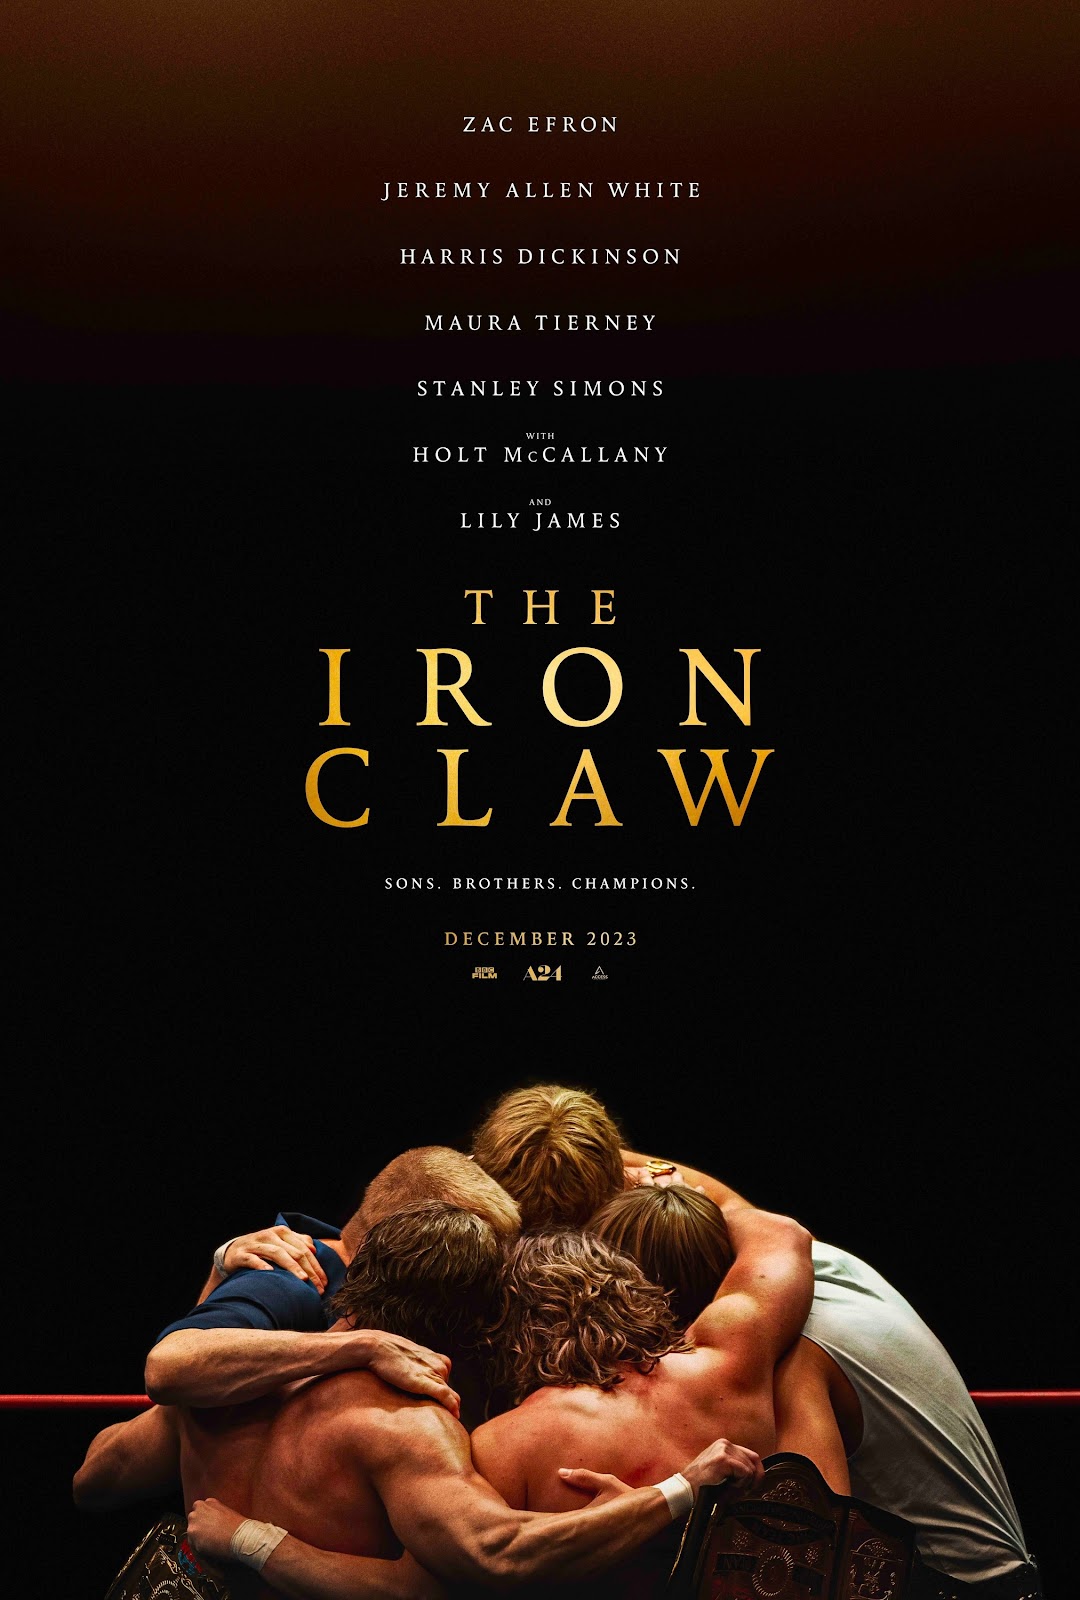 Go See The Iron Claw in theaters December 22